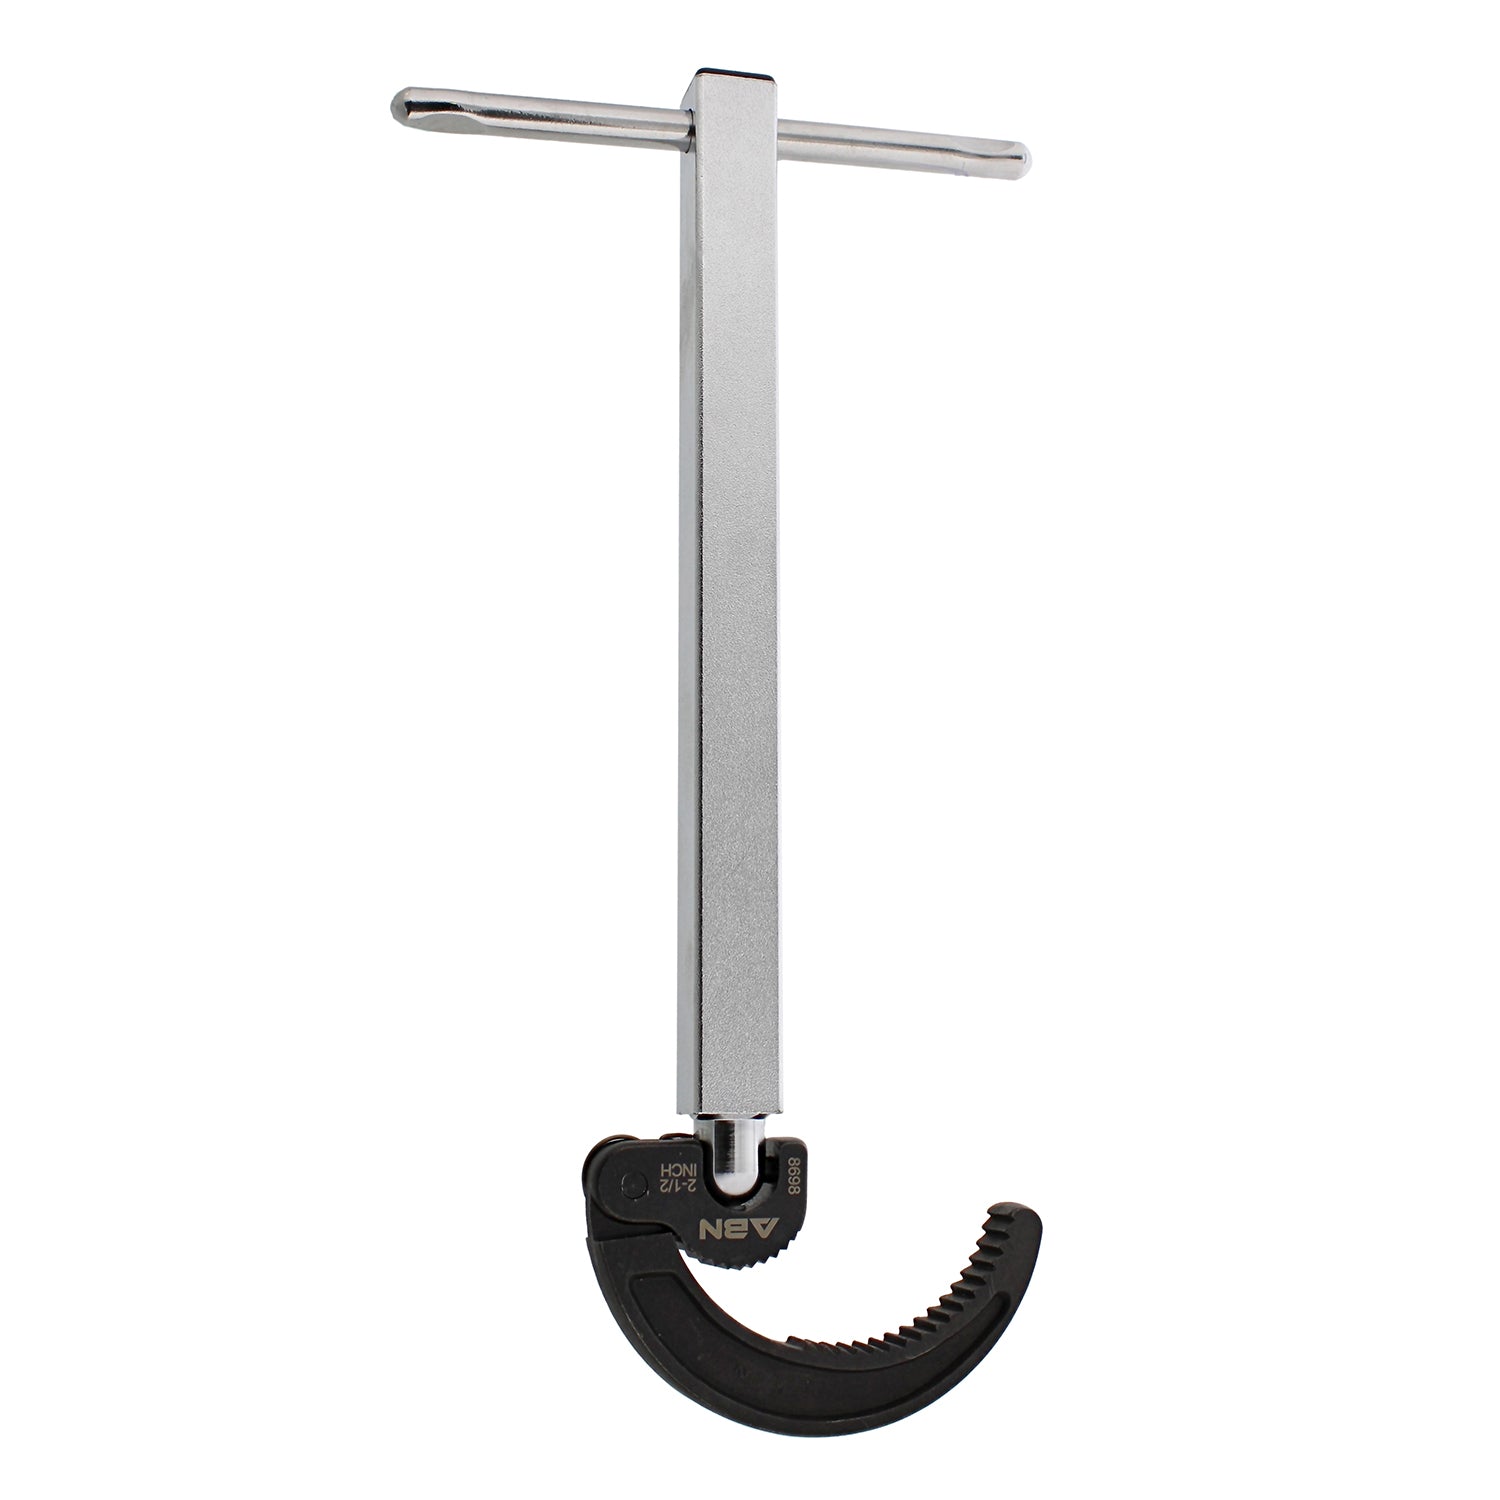 Large Basin Wrench Faucet Installation Tool Telescoping 7/8 to 2-1/2